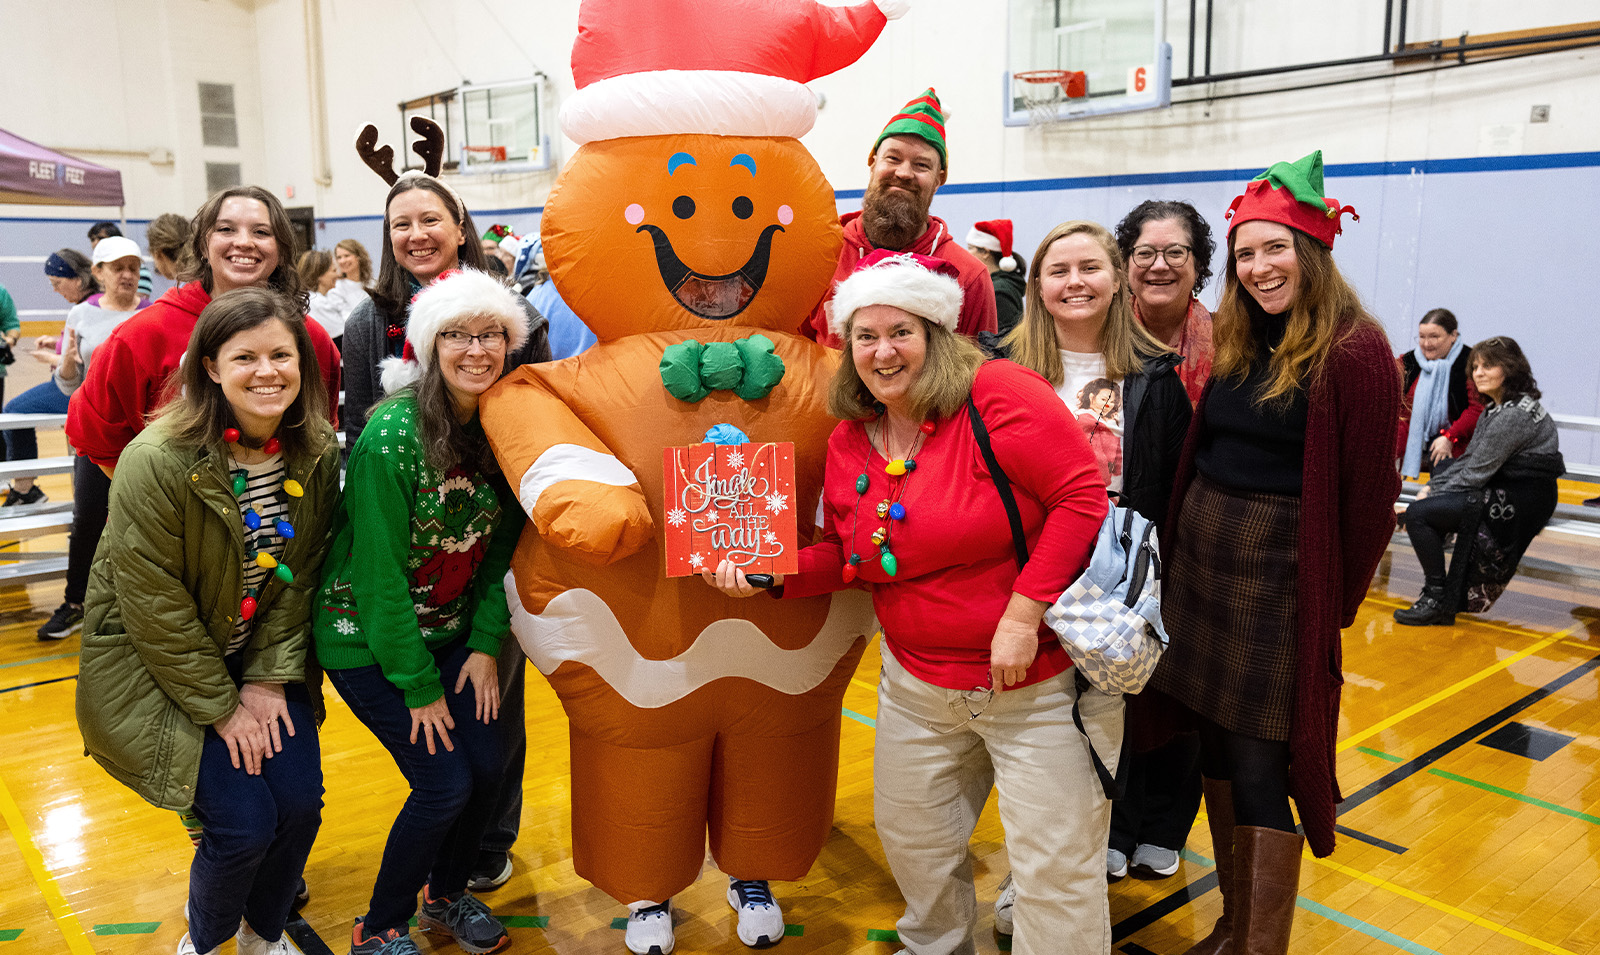 A group of people dressed up in Christmas costumes taking a picture with someone in a Gingerbread Man costume.